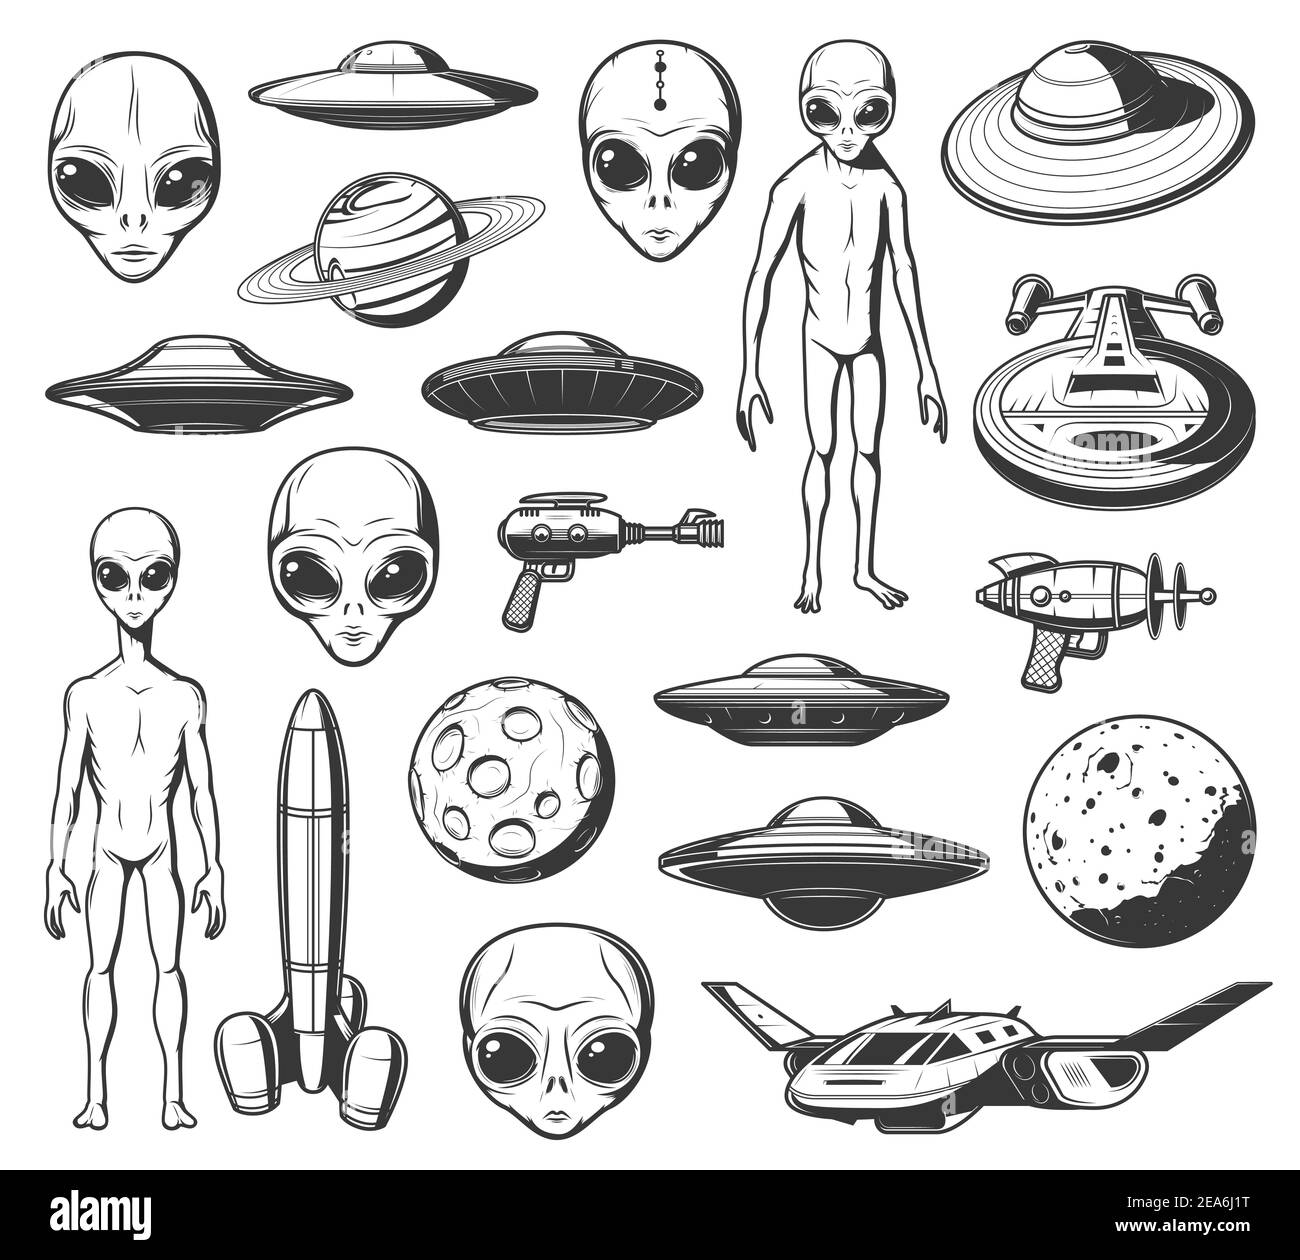 Aliens, ufo and space shuttles vector retro icons. Extraterrestrial comer with long arms, skinny body and huge eyes. Laser gun, saturn planet and spac Stock Vector